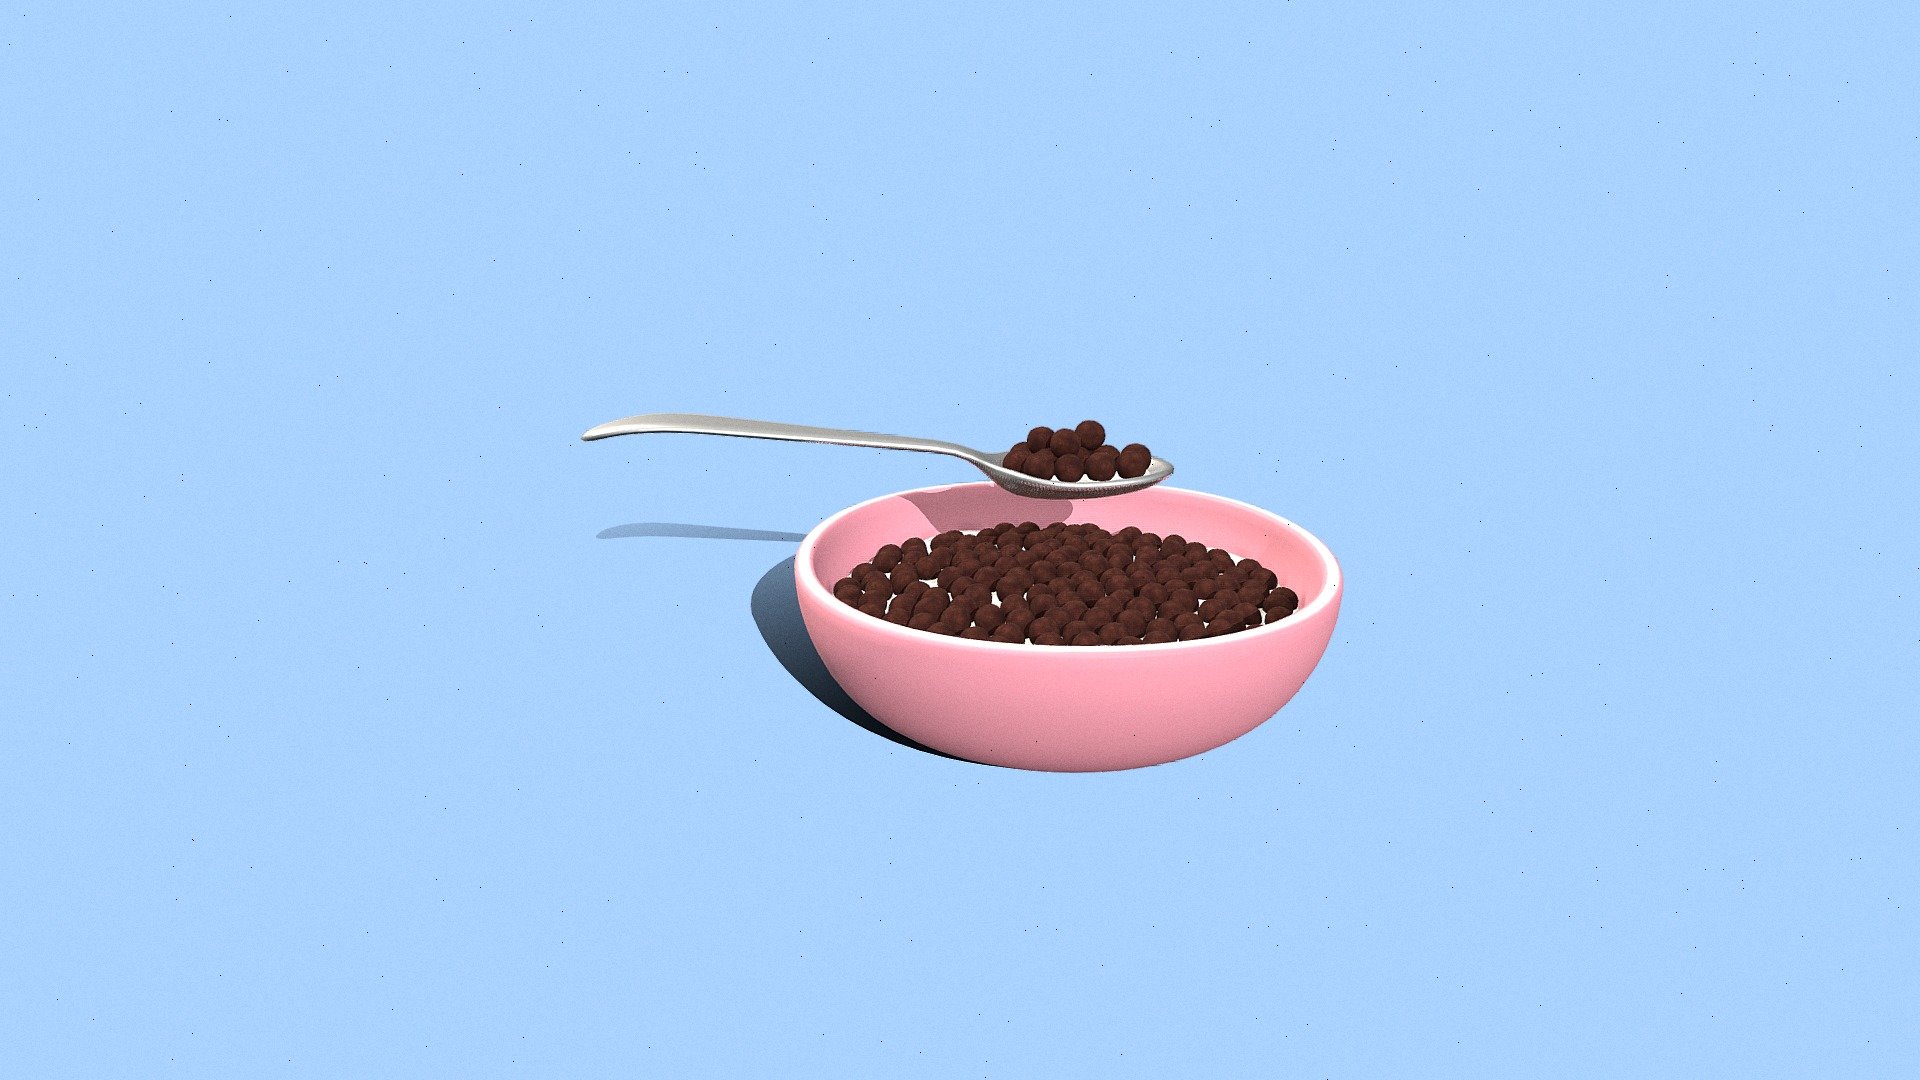 A lil creal bowl I made with shapekey to add different kinds of cereal - Cute Cereal Bowl - 3D model by Tij (@tijwah) 3d model